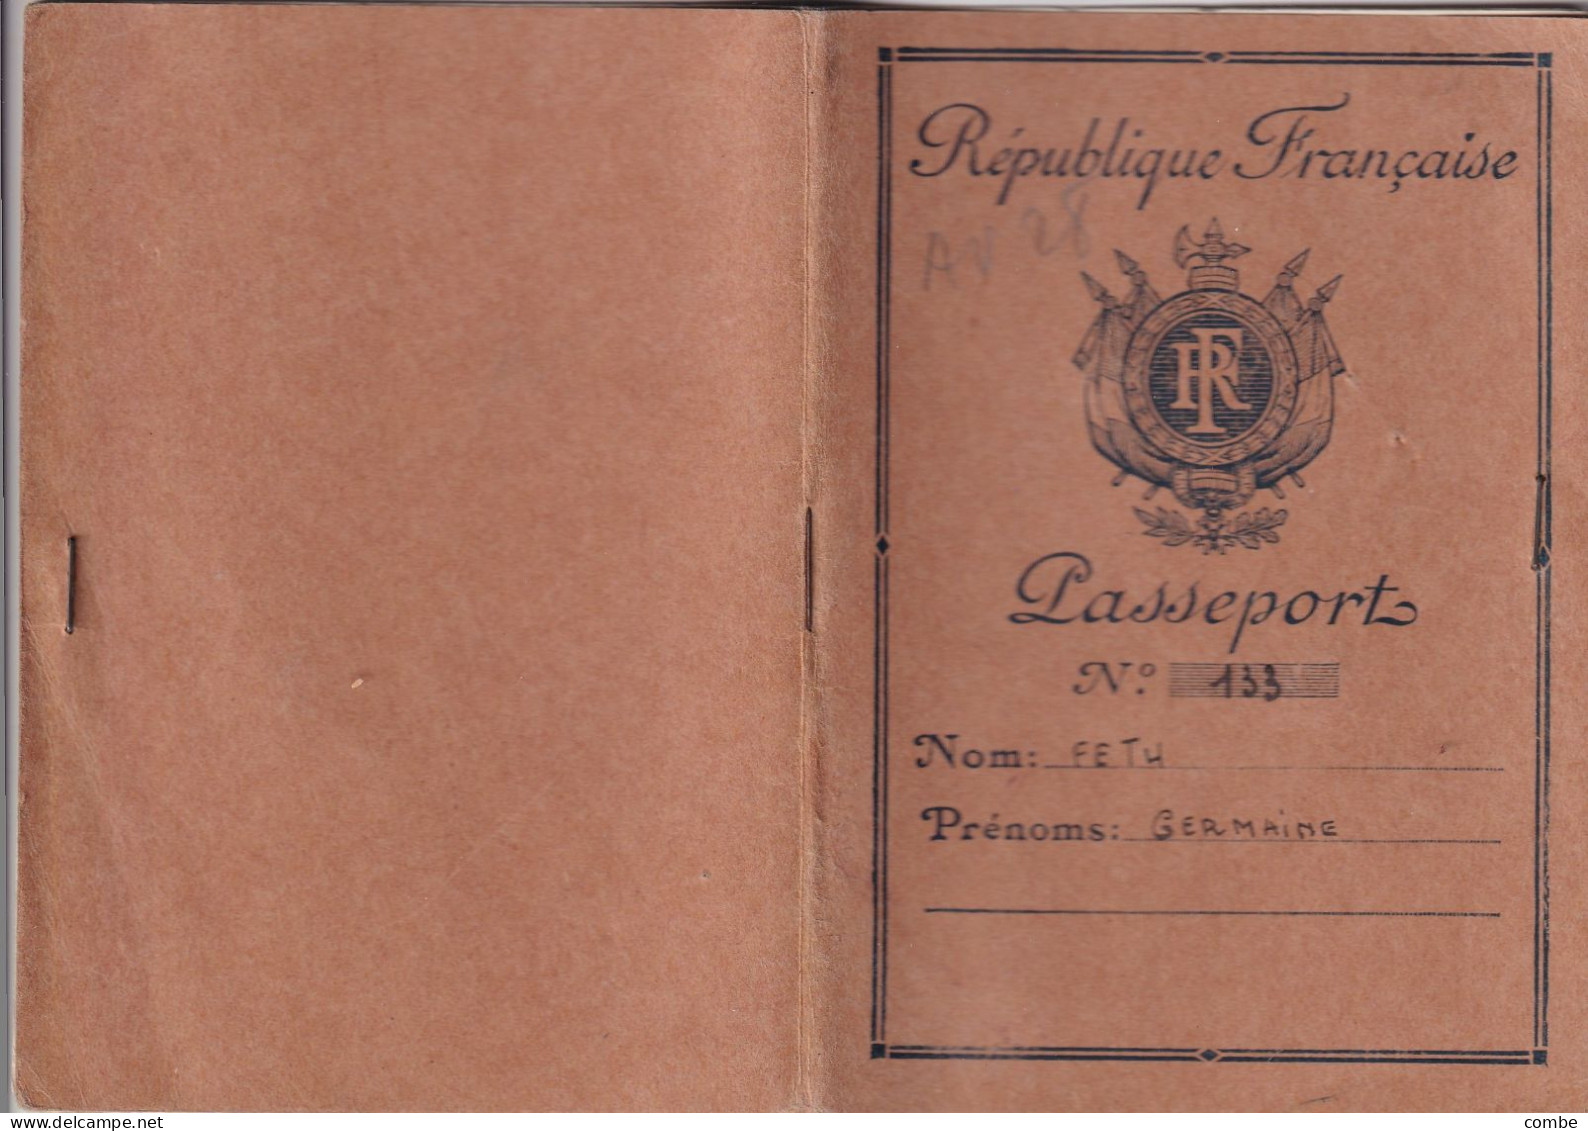 PASSEPORT. FOUGERES 1952 - Historical Documents